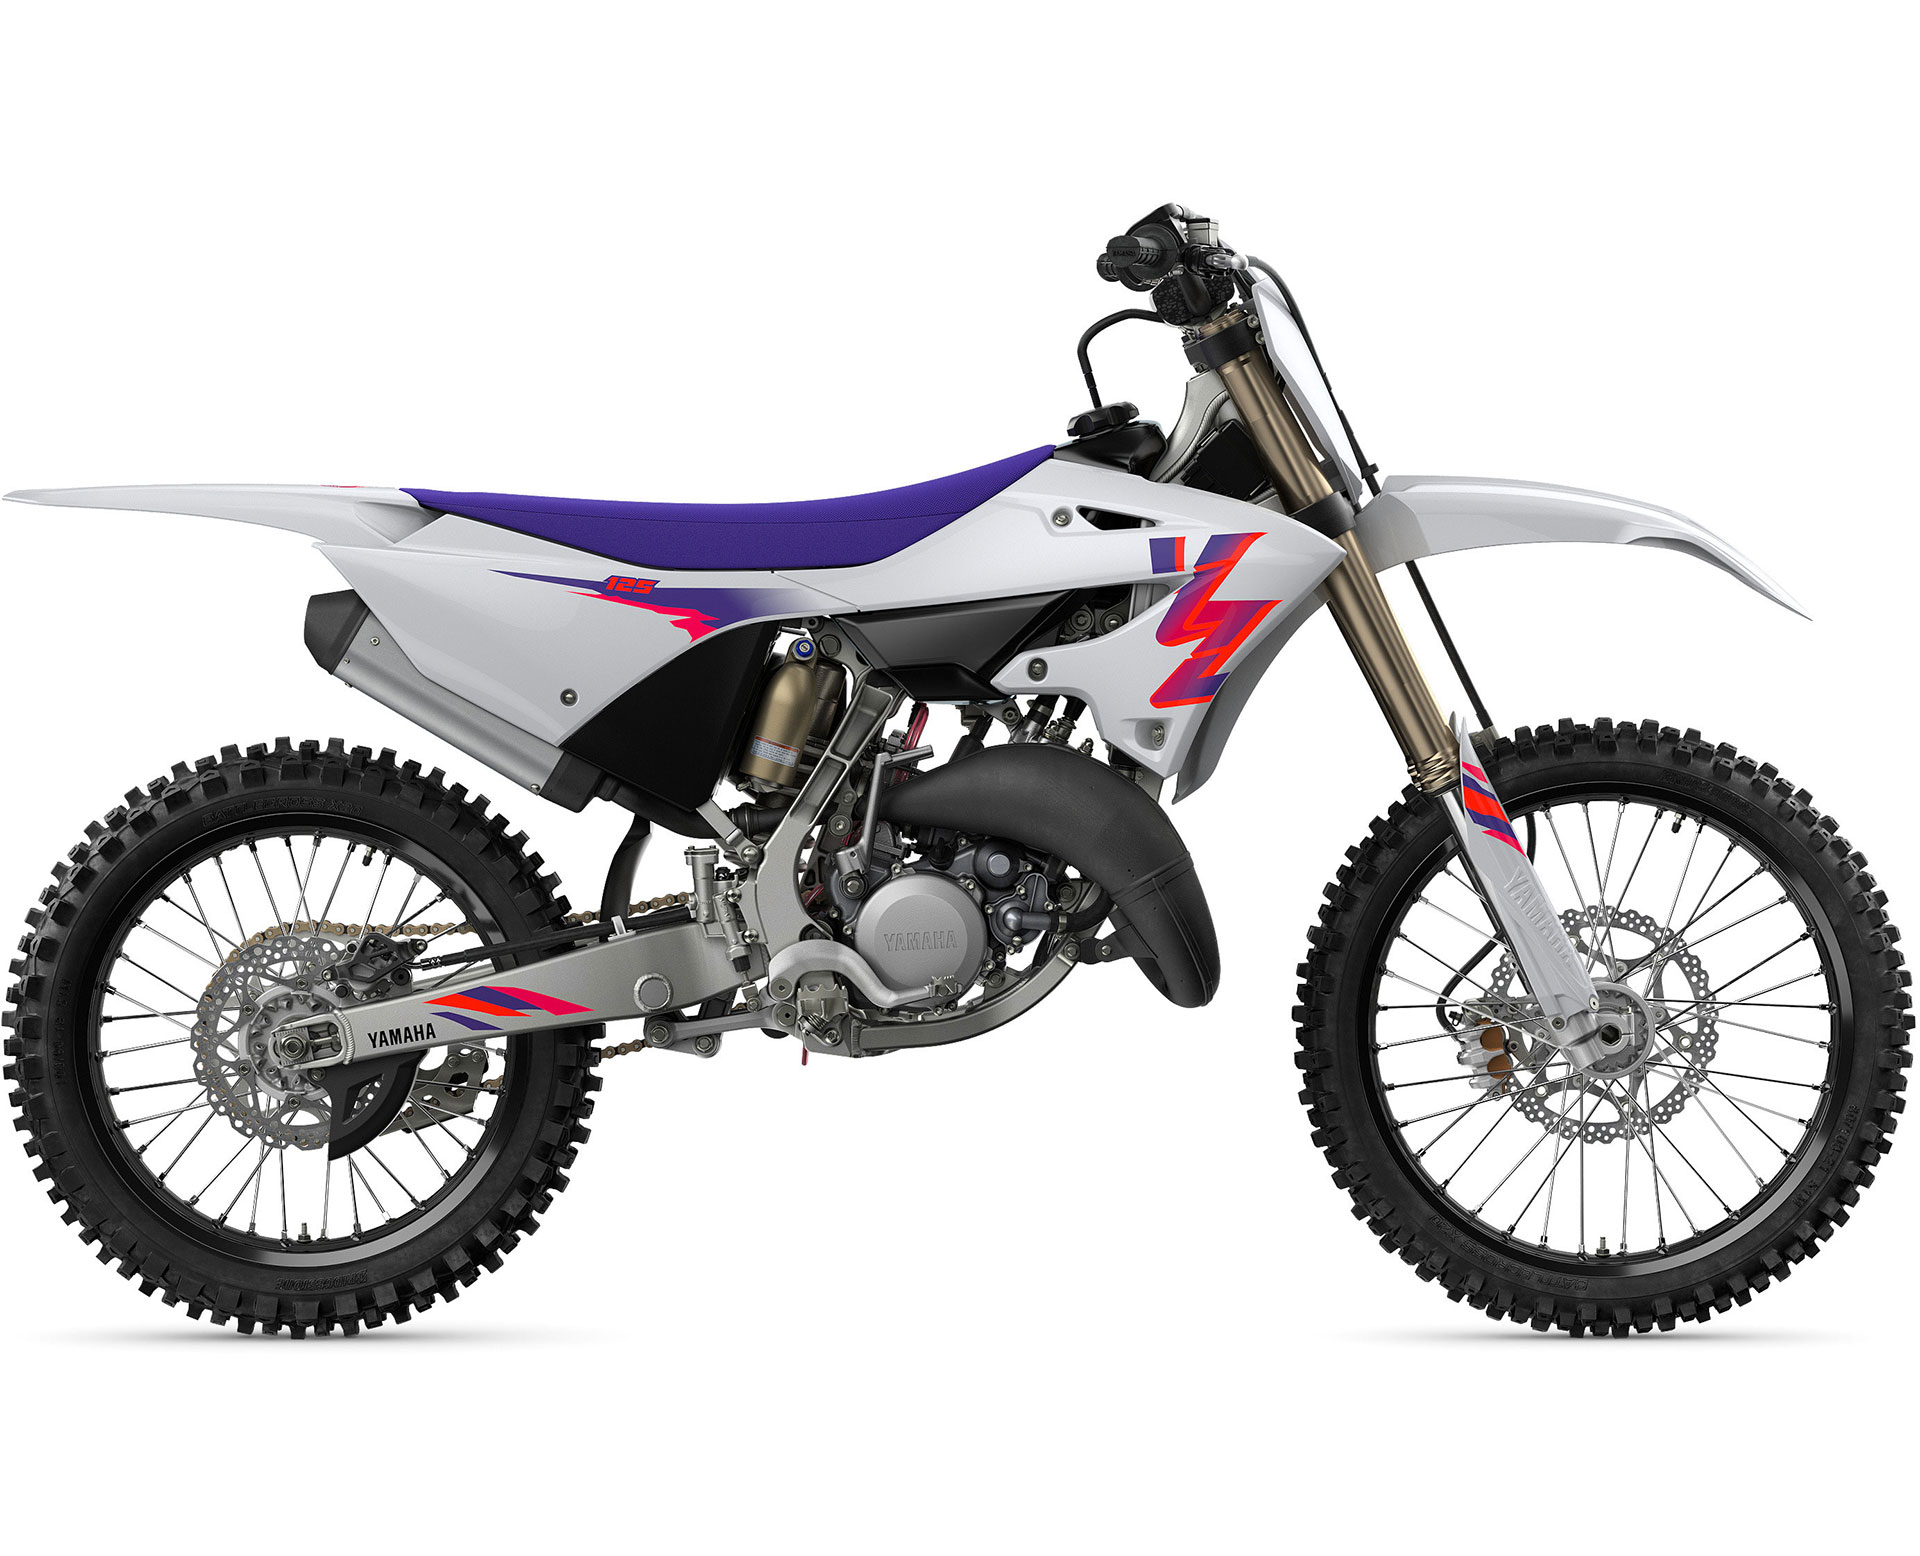 Thumbnail of your customized YZ125 2024